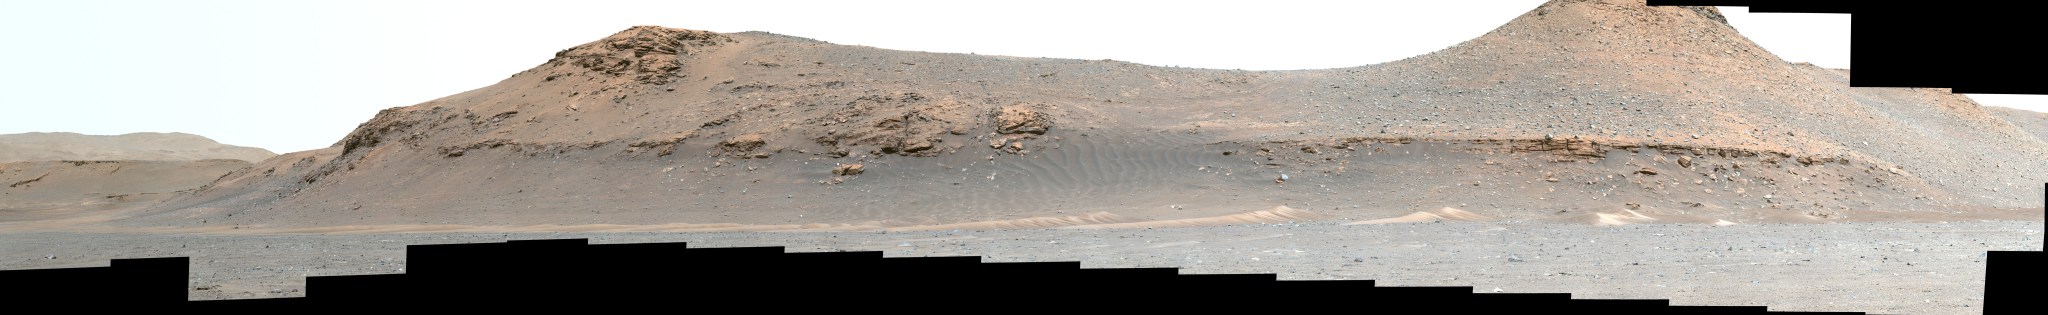 The expanse of Jezero Crater’s river delta is shown in this panorama of 64 stitched-together images taken by the Mastcam-Z system on NASA’s Perseverance Mars rover on April 11, 2022, the 406th Martian day, or sol, of the mission.